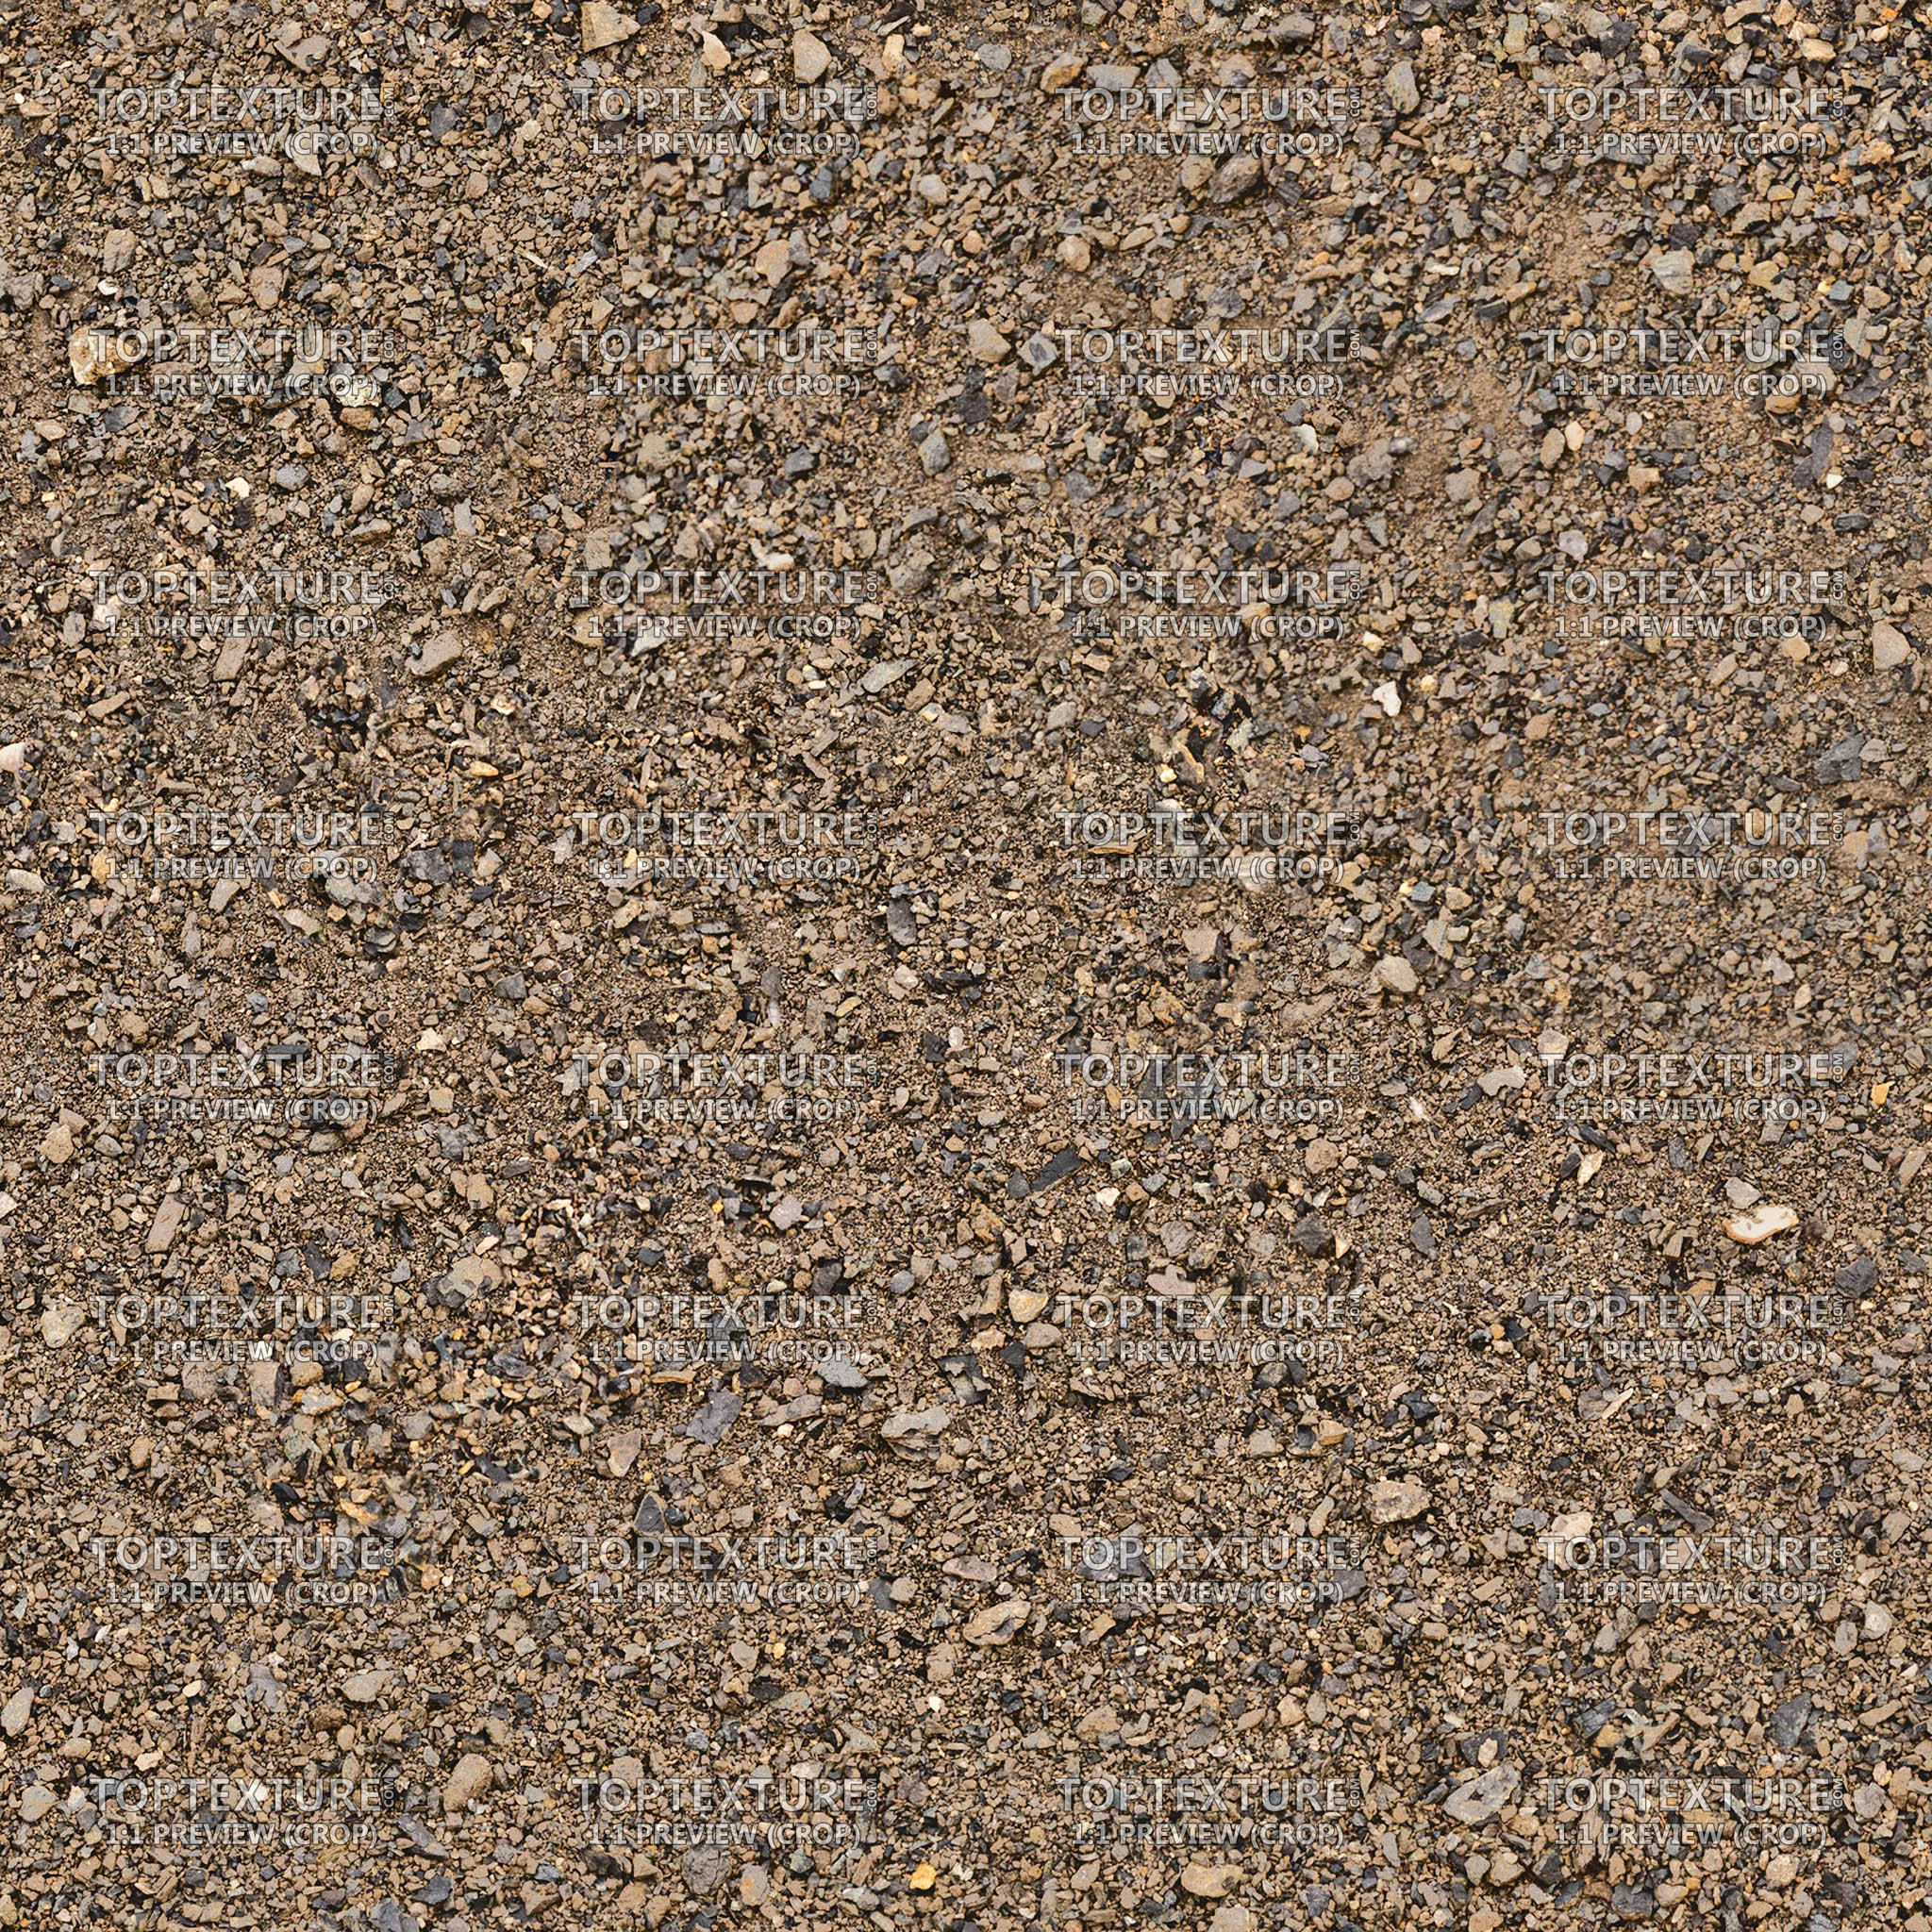 Brown Ground Small Stones - 100% zoom